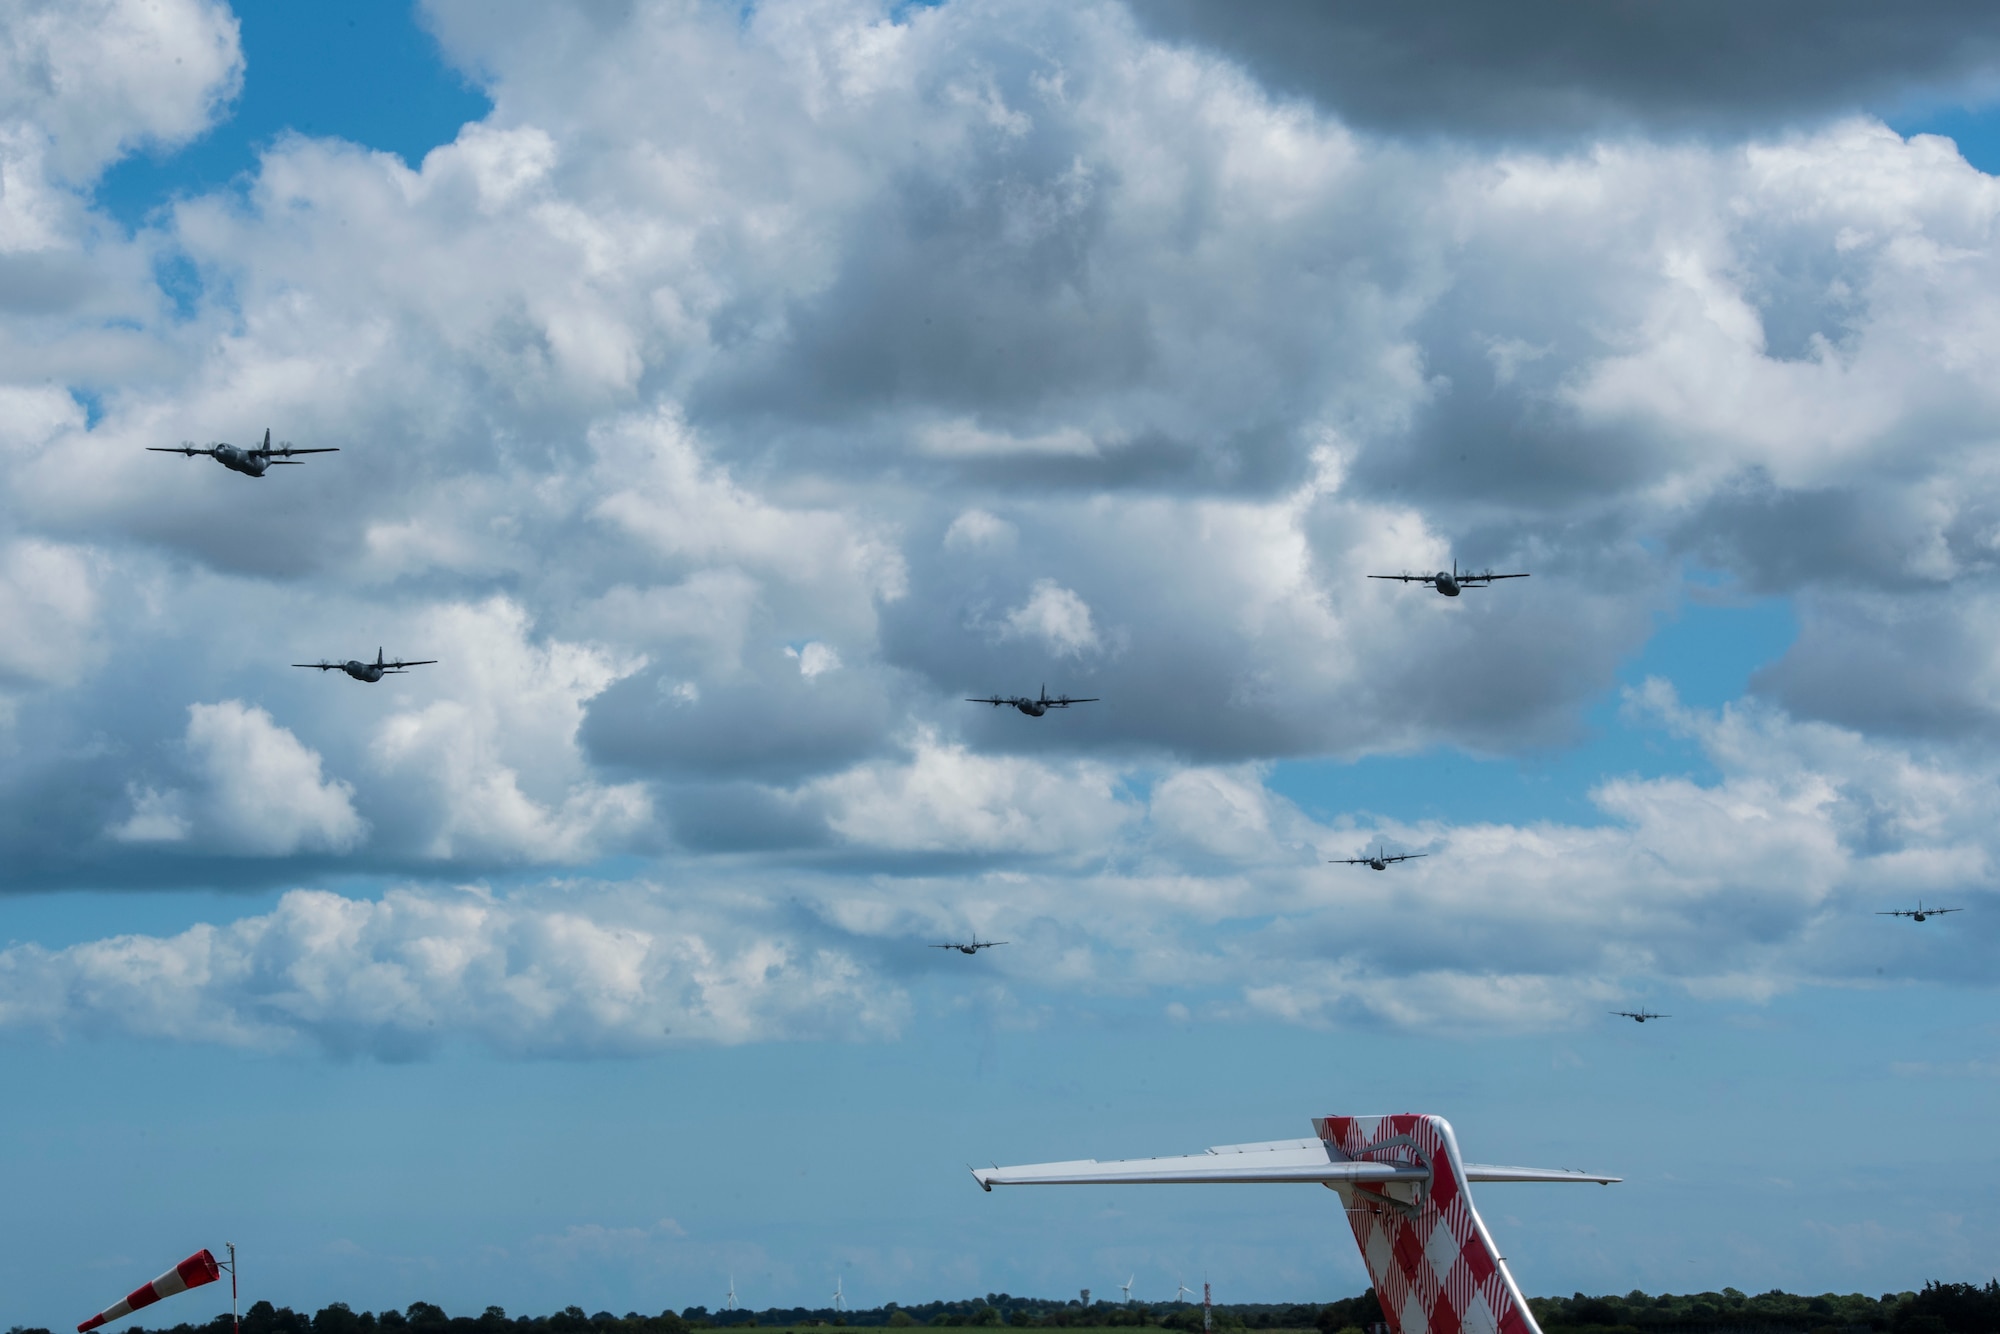 An eight-ship formation of U.S. Air Force C-130J Super Hercules flies over Cherbourg-Maupertus Airport, France, June 6, 2019. The formation flew over the D-Day commemoration ceremony held at the Normandy American Cemetery and Memorial. (U.S. Air Force photo by Senior Airman Devin M. Rumbaugh)